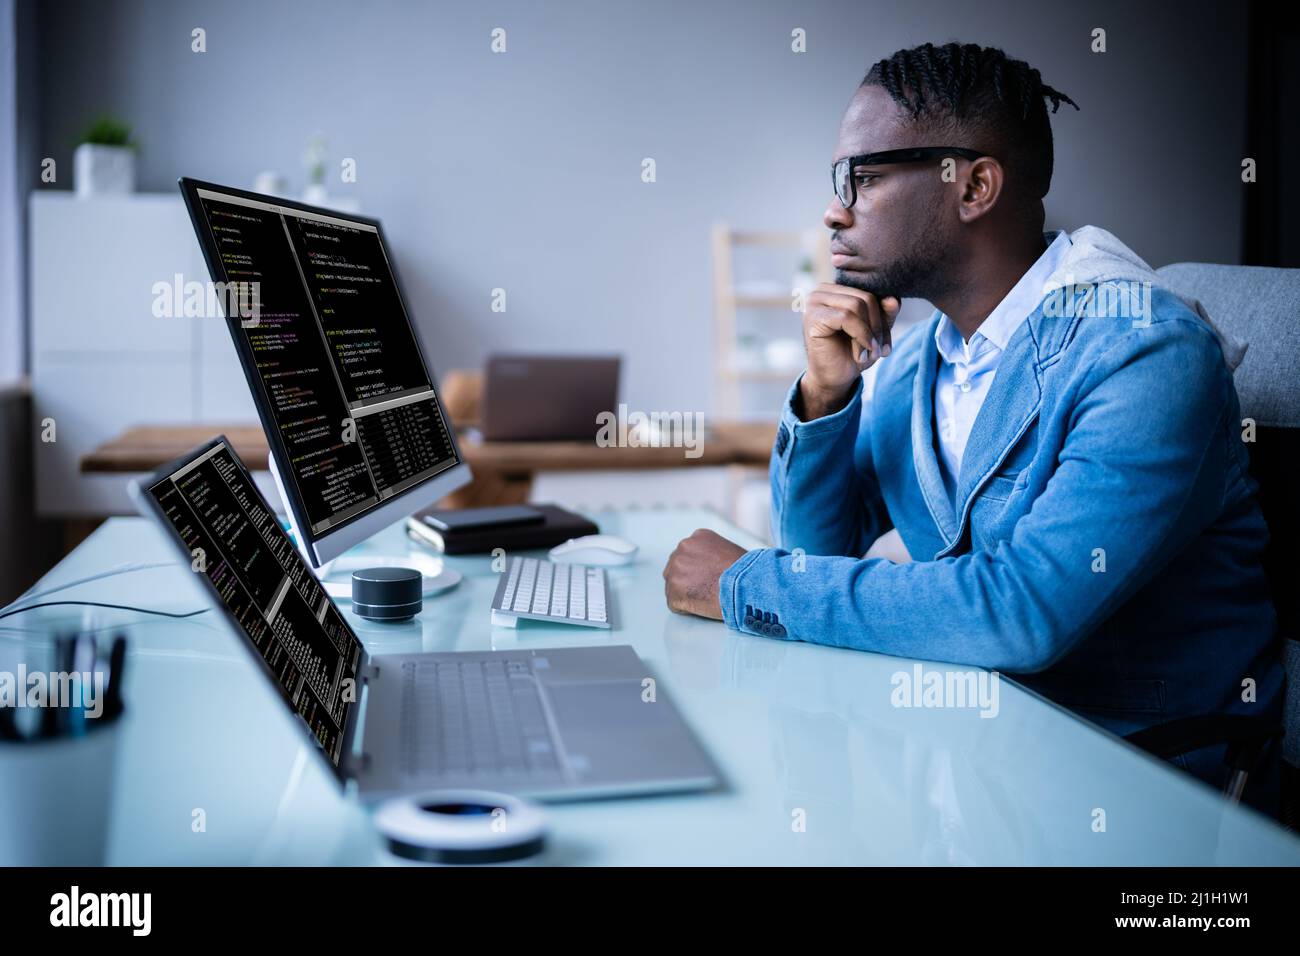 Software Programmer Coder Working On Computer At Night Stock Photo